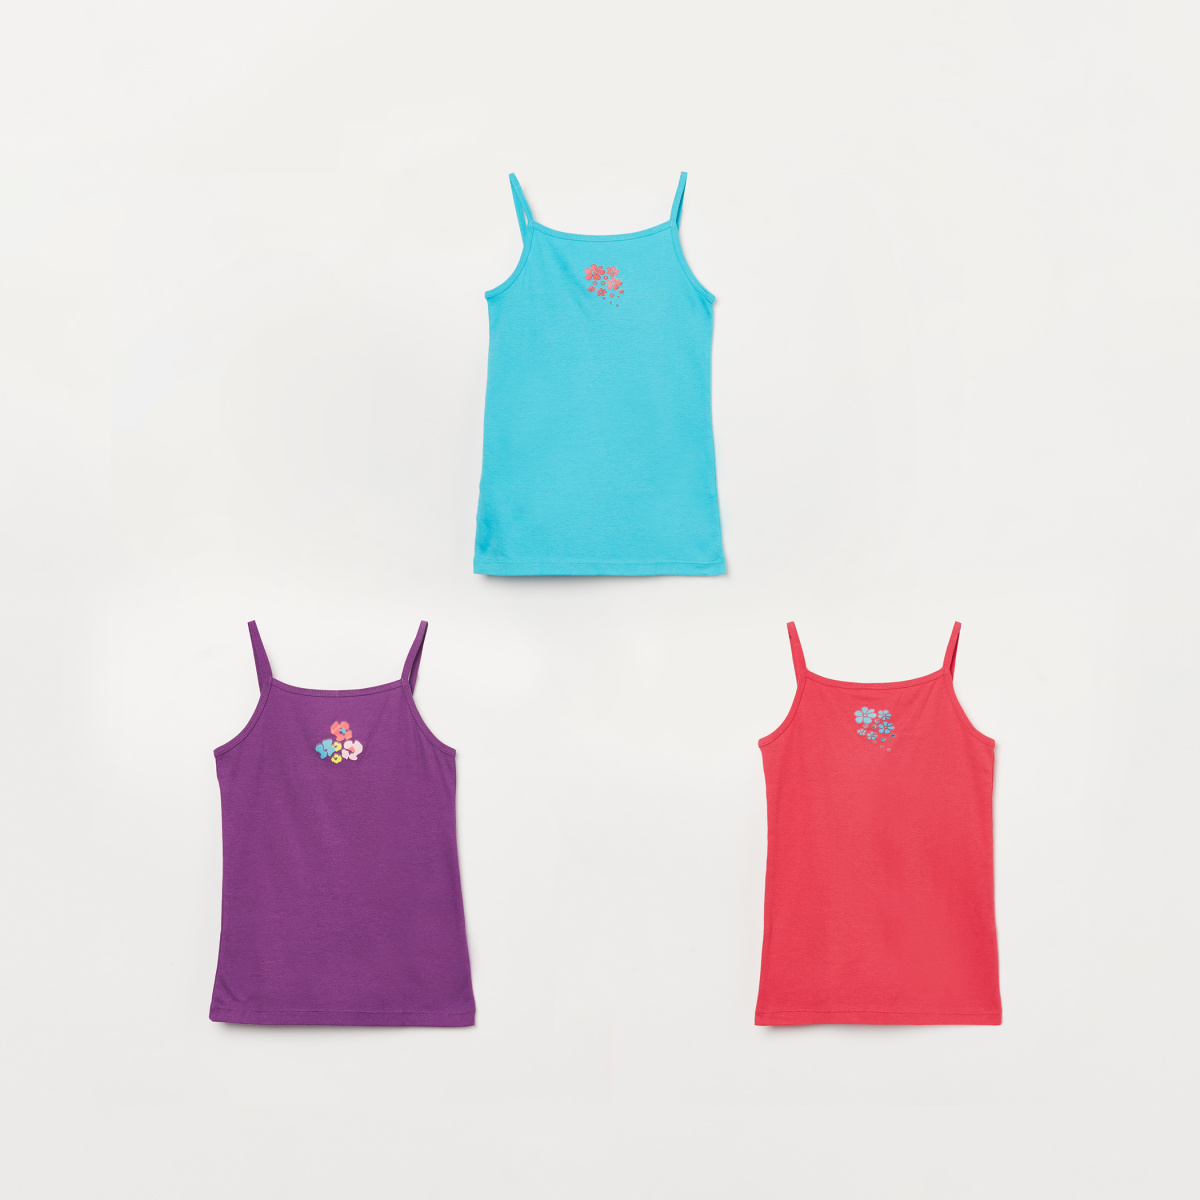 JOCKEY Girls Printed Camisoles - Set of 3, Lifestyle Stores, Sector 4C